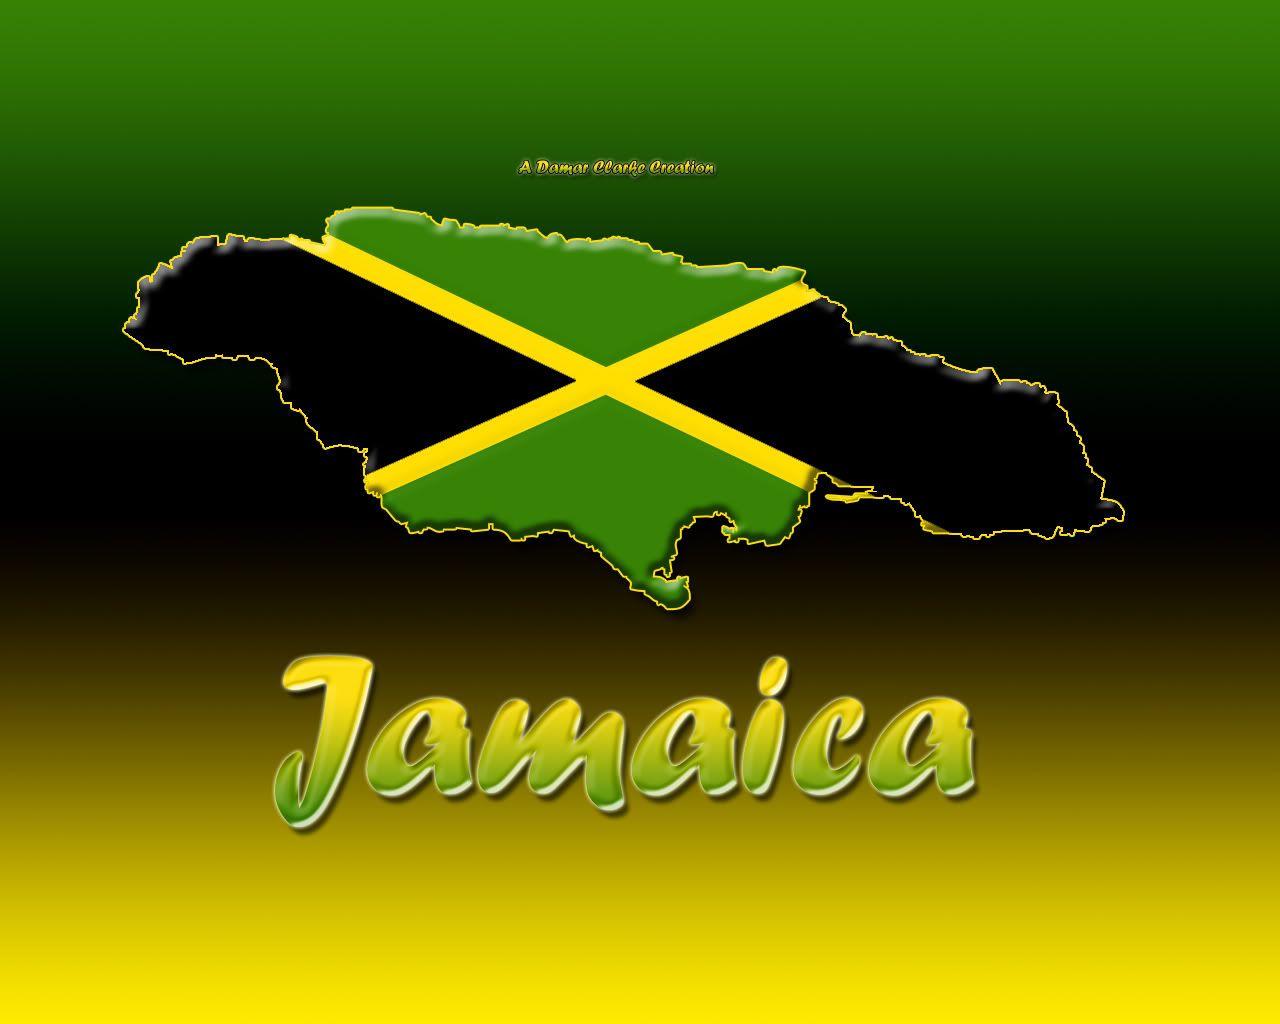 Happy Jamaican Independence day 2014 Image, Happy Jamaican